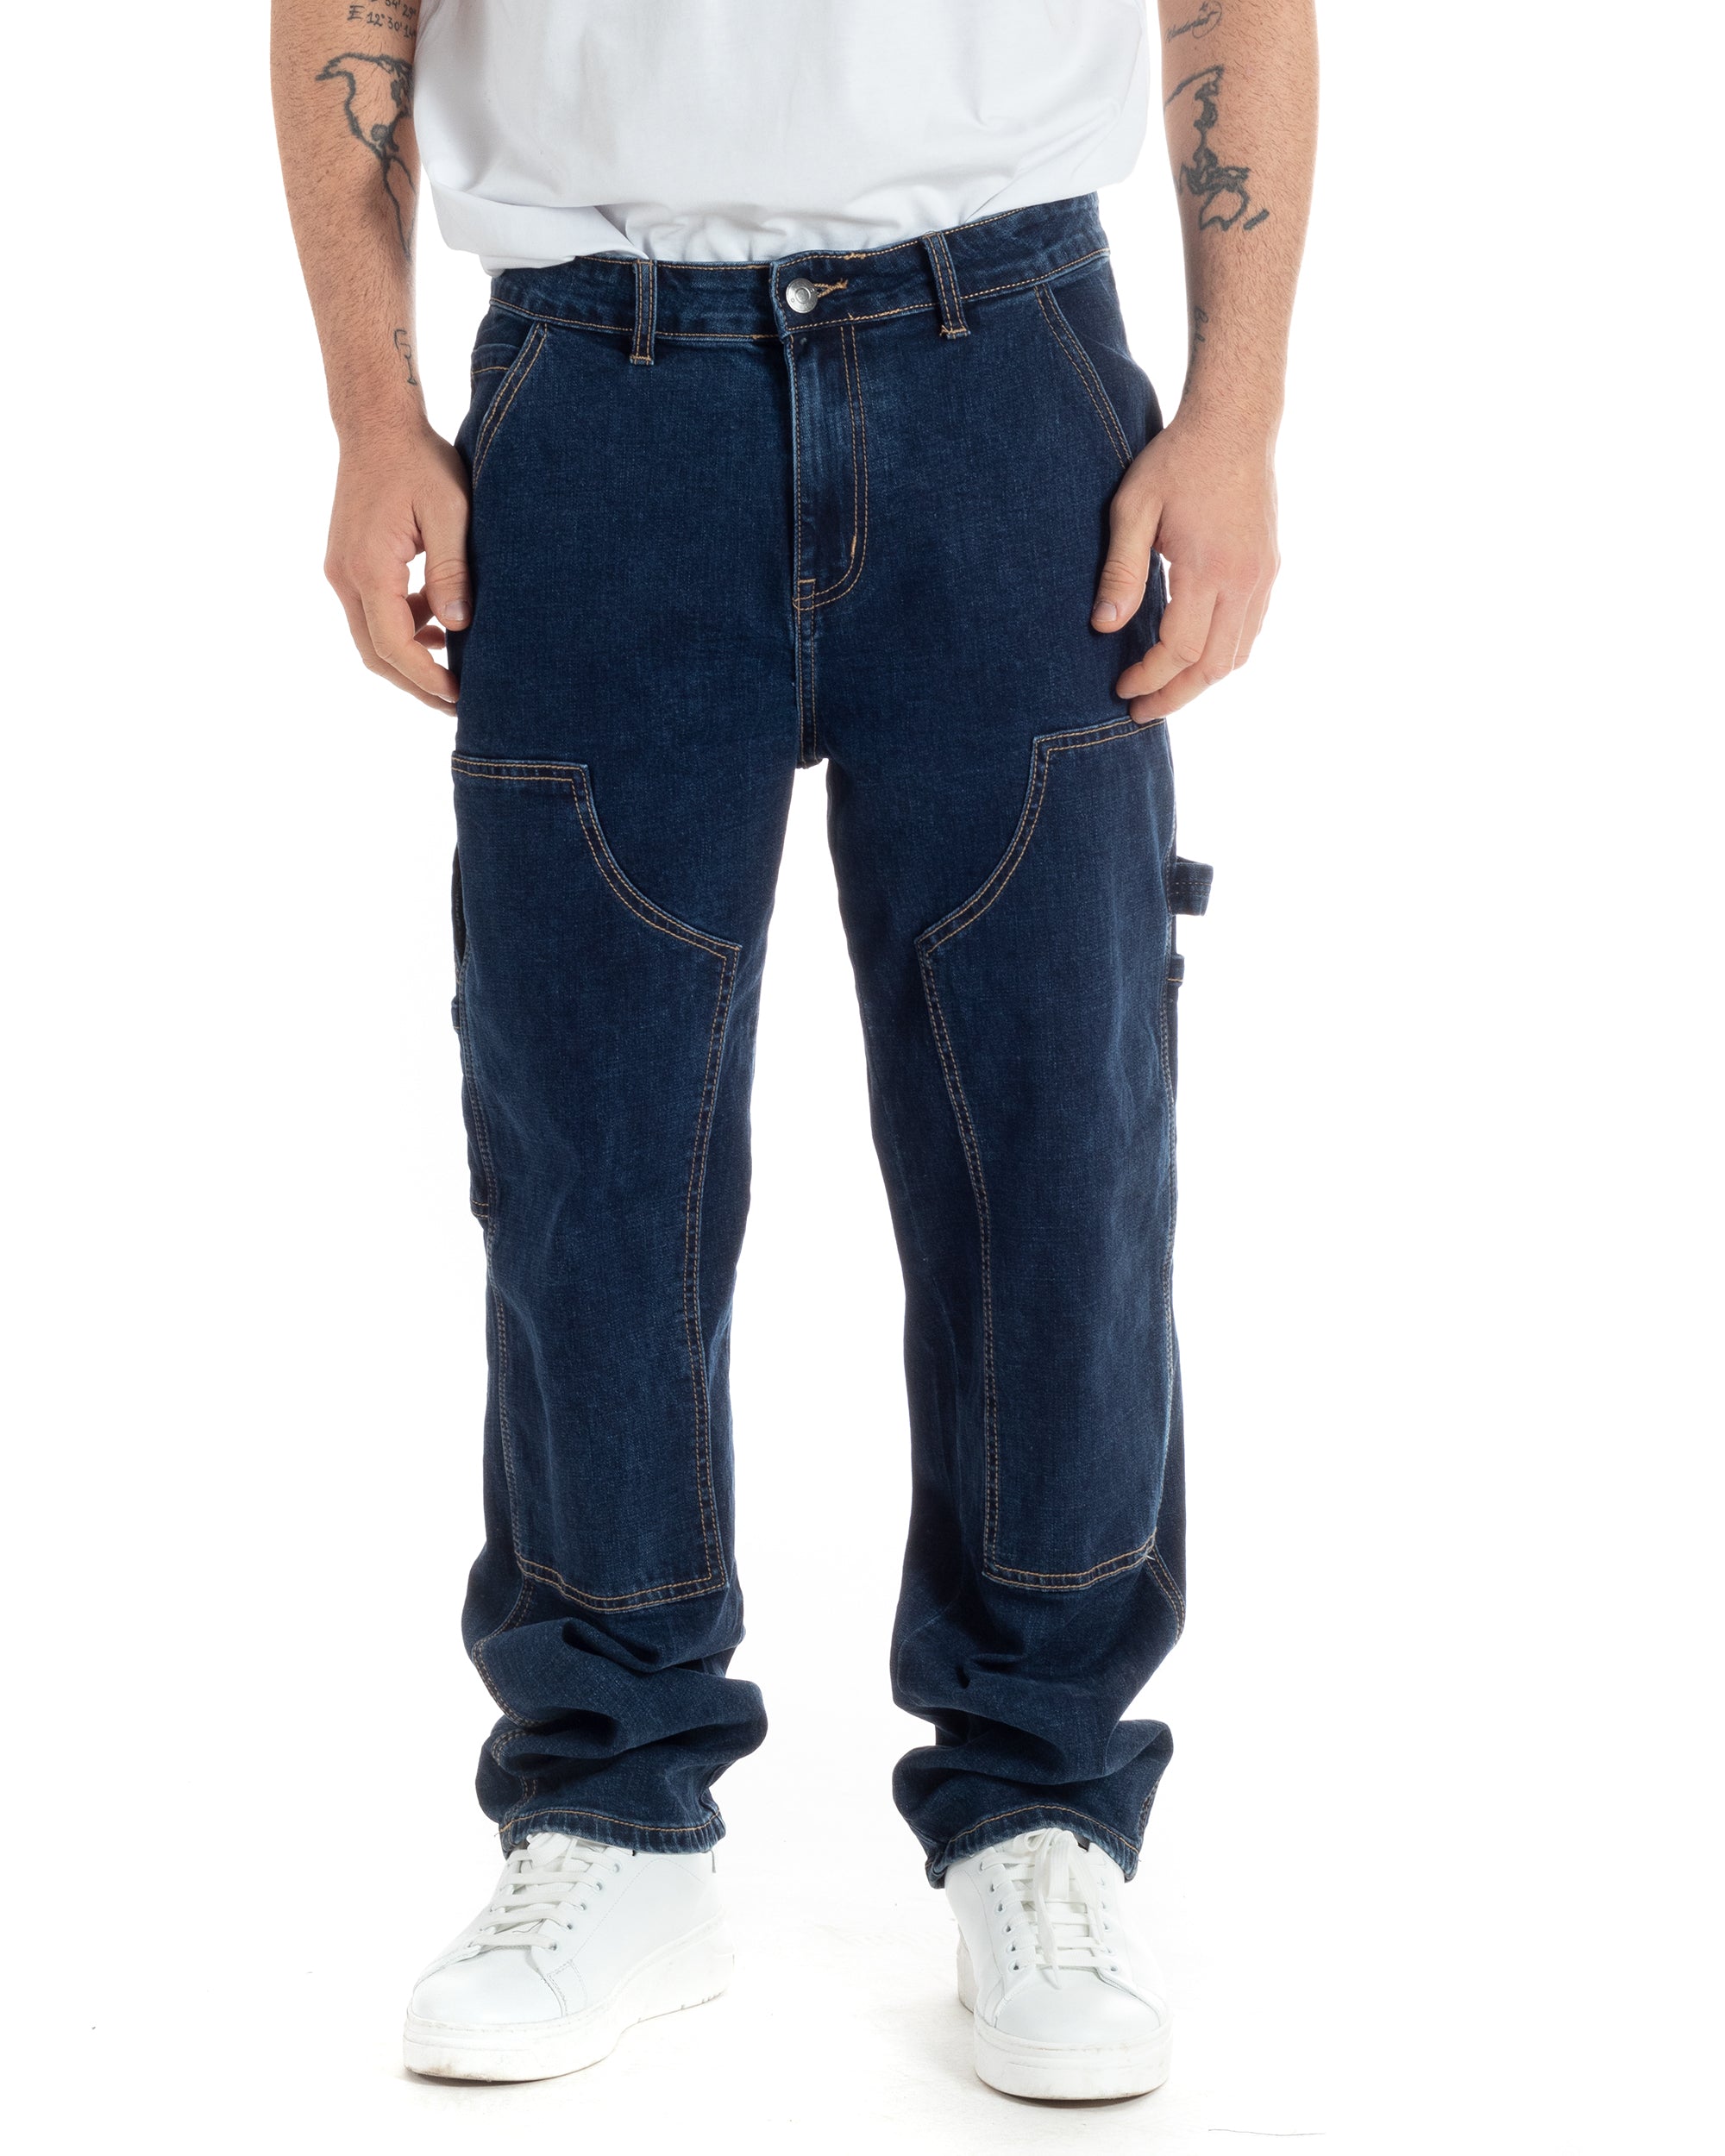 Men's Straight Fit Carpenter Dark Denim Jeans Trousers with Side Pockets GIOSAL-P5925A